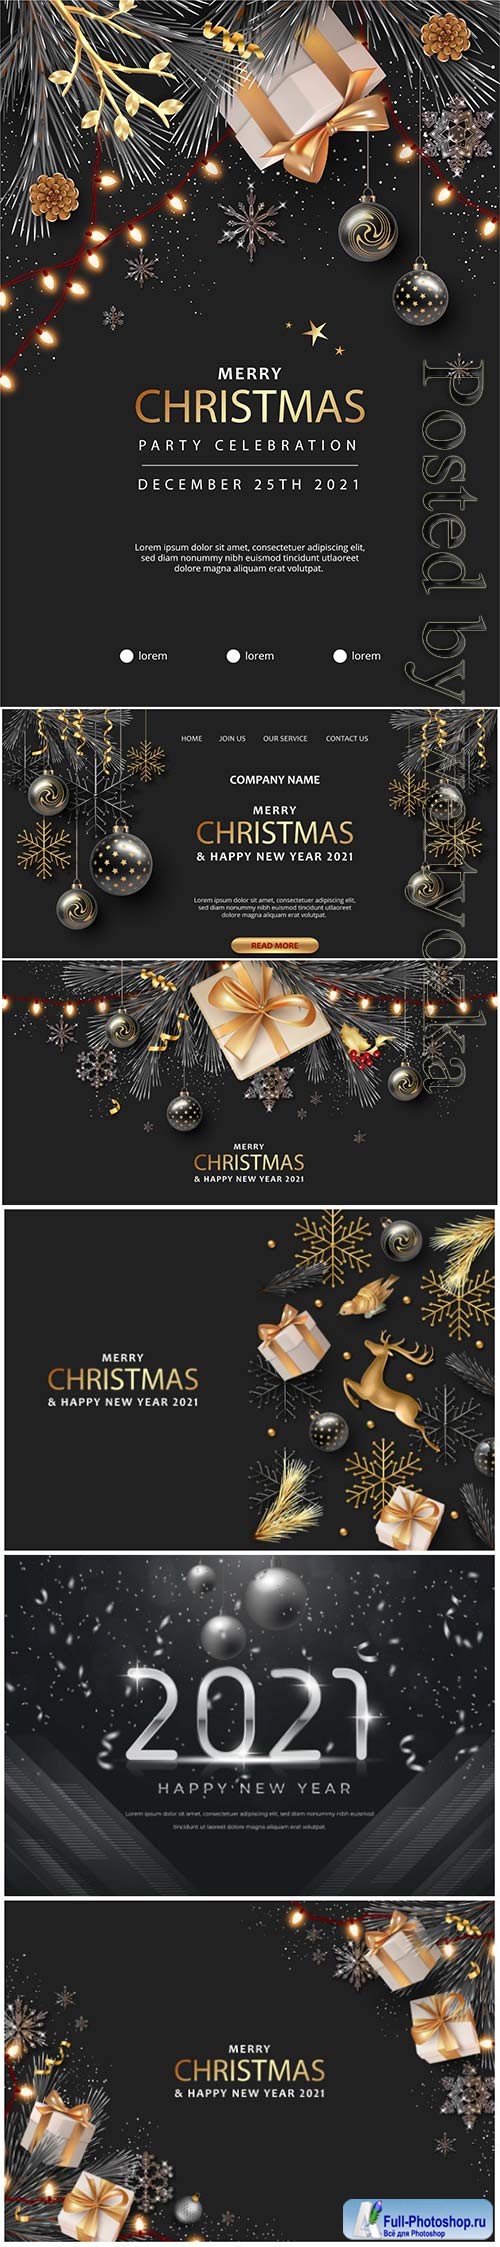 New year and Christmas party vector poster